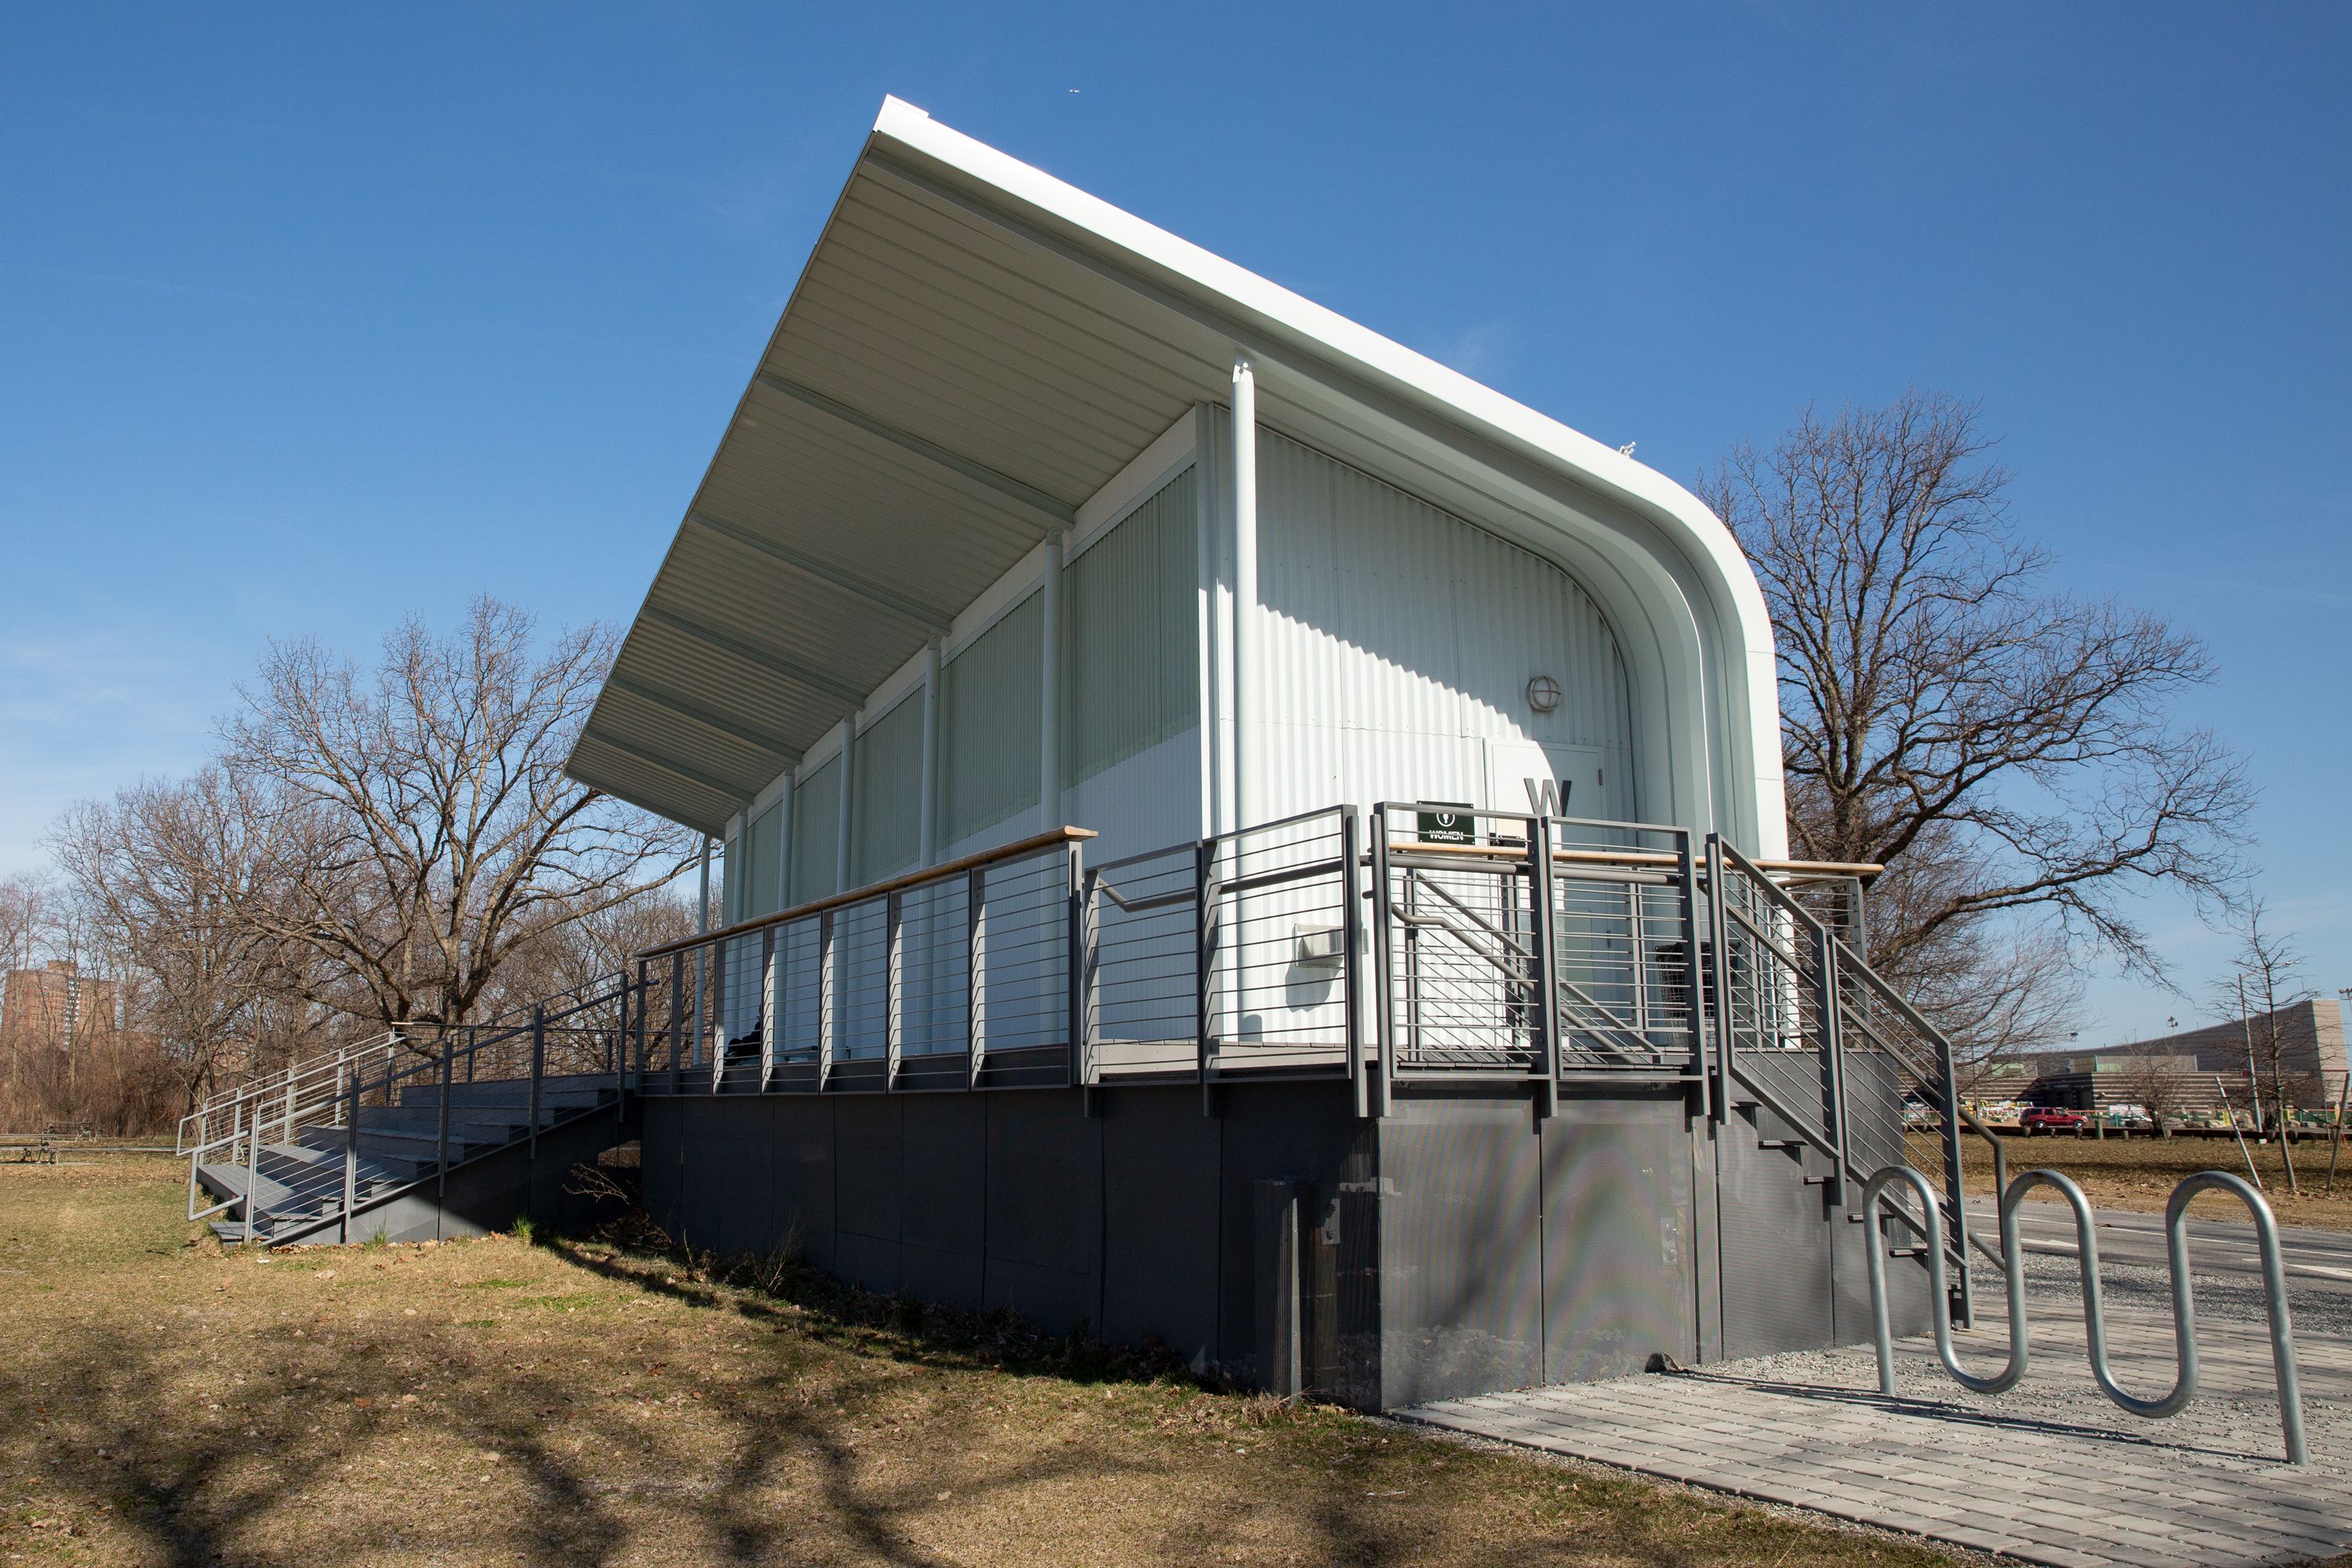 A public bathroom in Ferry Point Park in The Bronx cost nearly $5 million to construct, March 27, 2019.